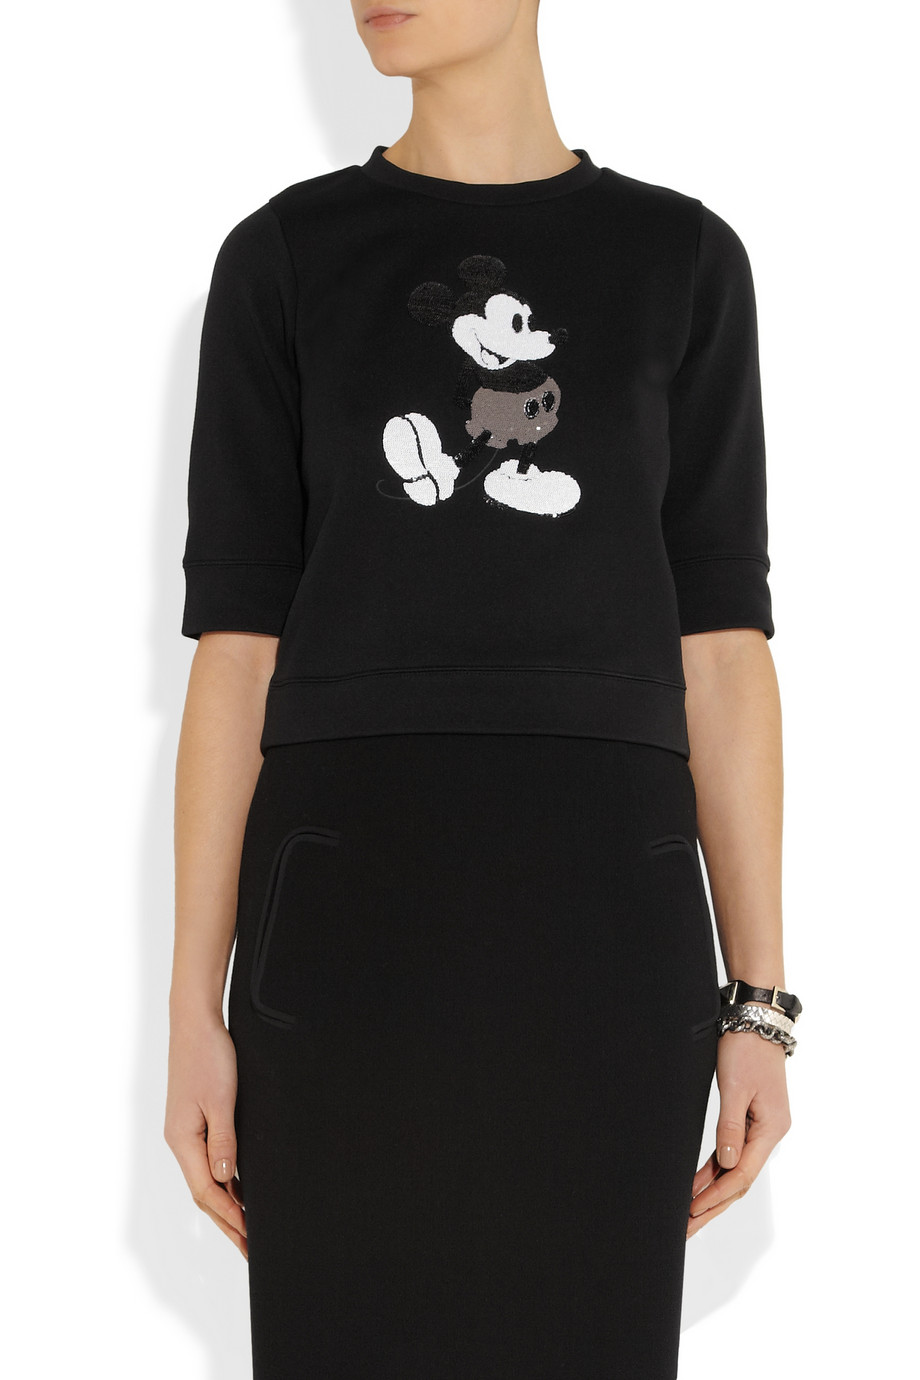 Marc Jacobs Mickey Mouse-Sequined Jersey Sweatshirt in ...